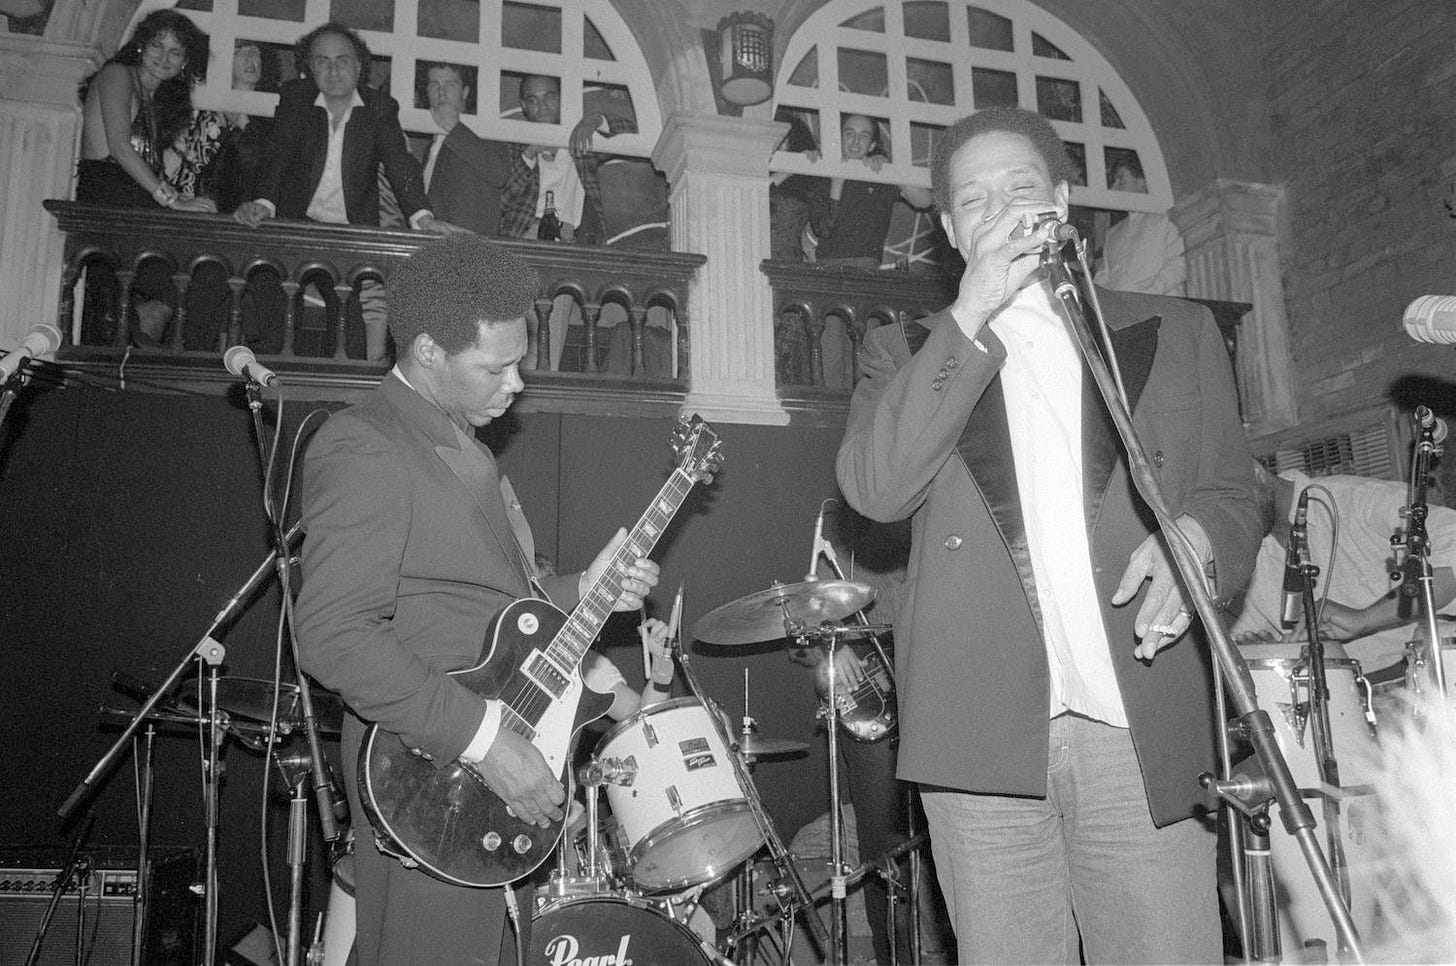 Nile Rodgers on Twitter: "Me and Al Jarreau performing at my birthday party  in '86. http://t.co/2JunE03cpg http://t.co/pLsU0mXPDL" / Twitter